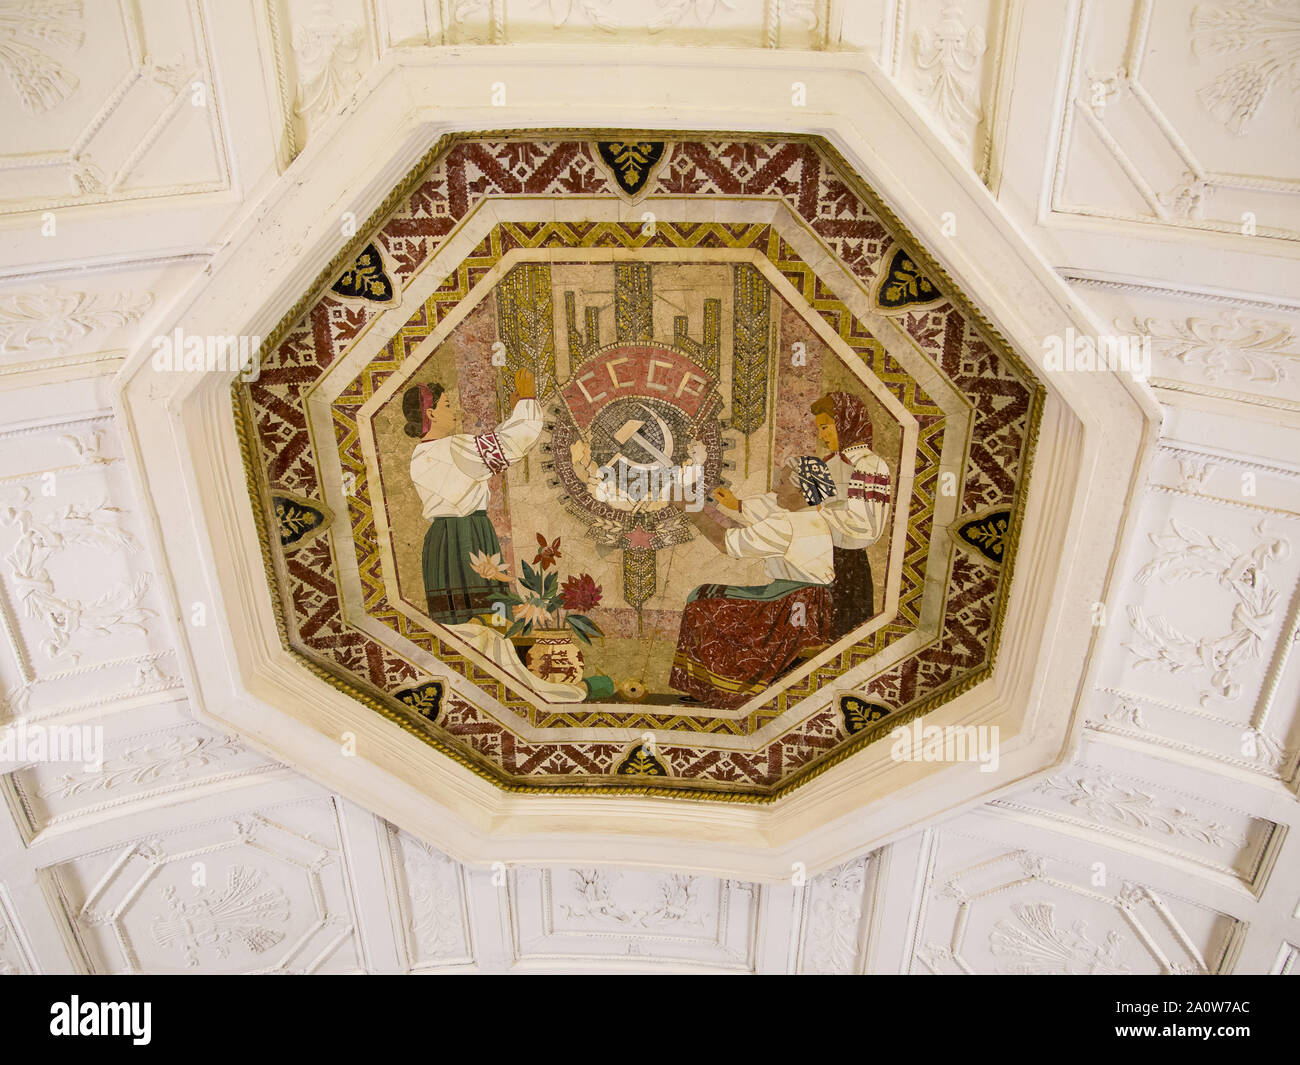 Moscow, Russia - June 23, 2017: Mosaic at Moscow metro station Stock Photo